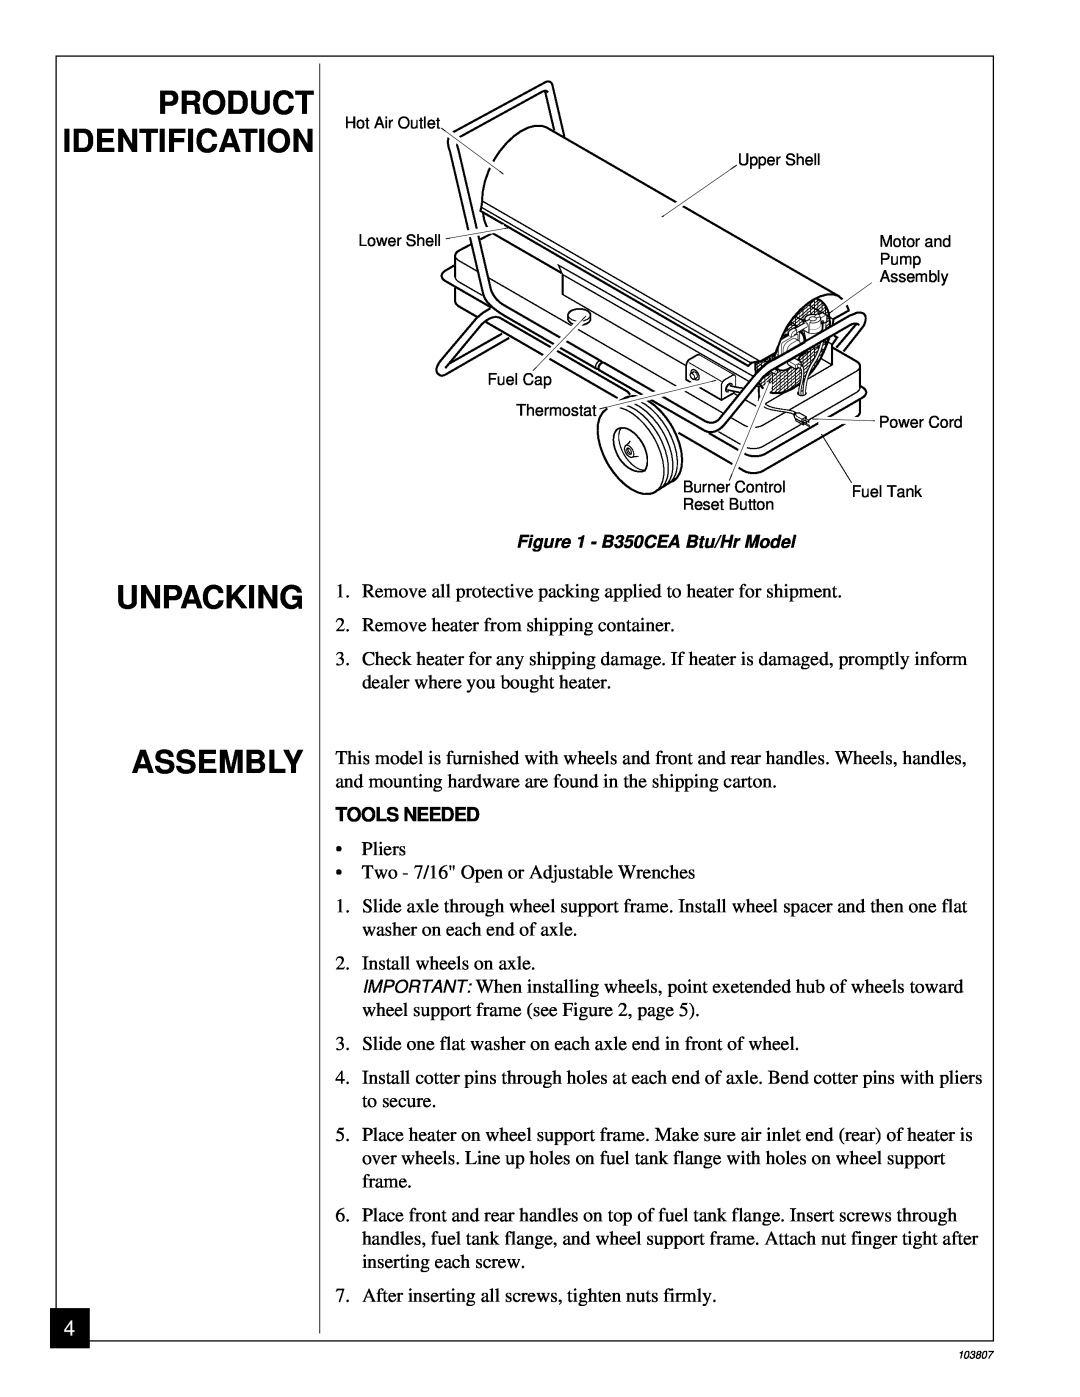 Desa B350CEA owner manual Unpacking Assembly, Product Identification, Tools Needed 